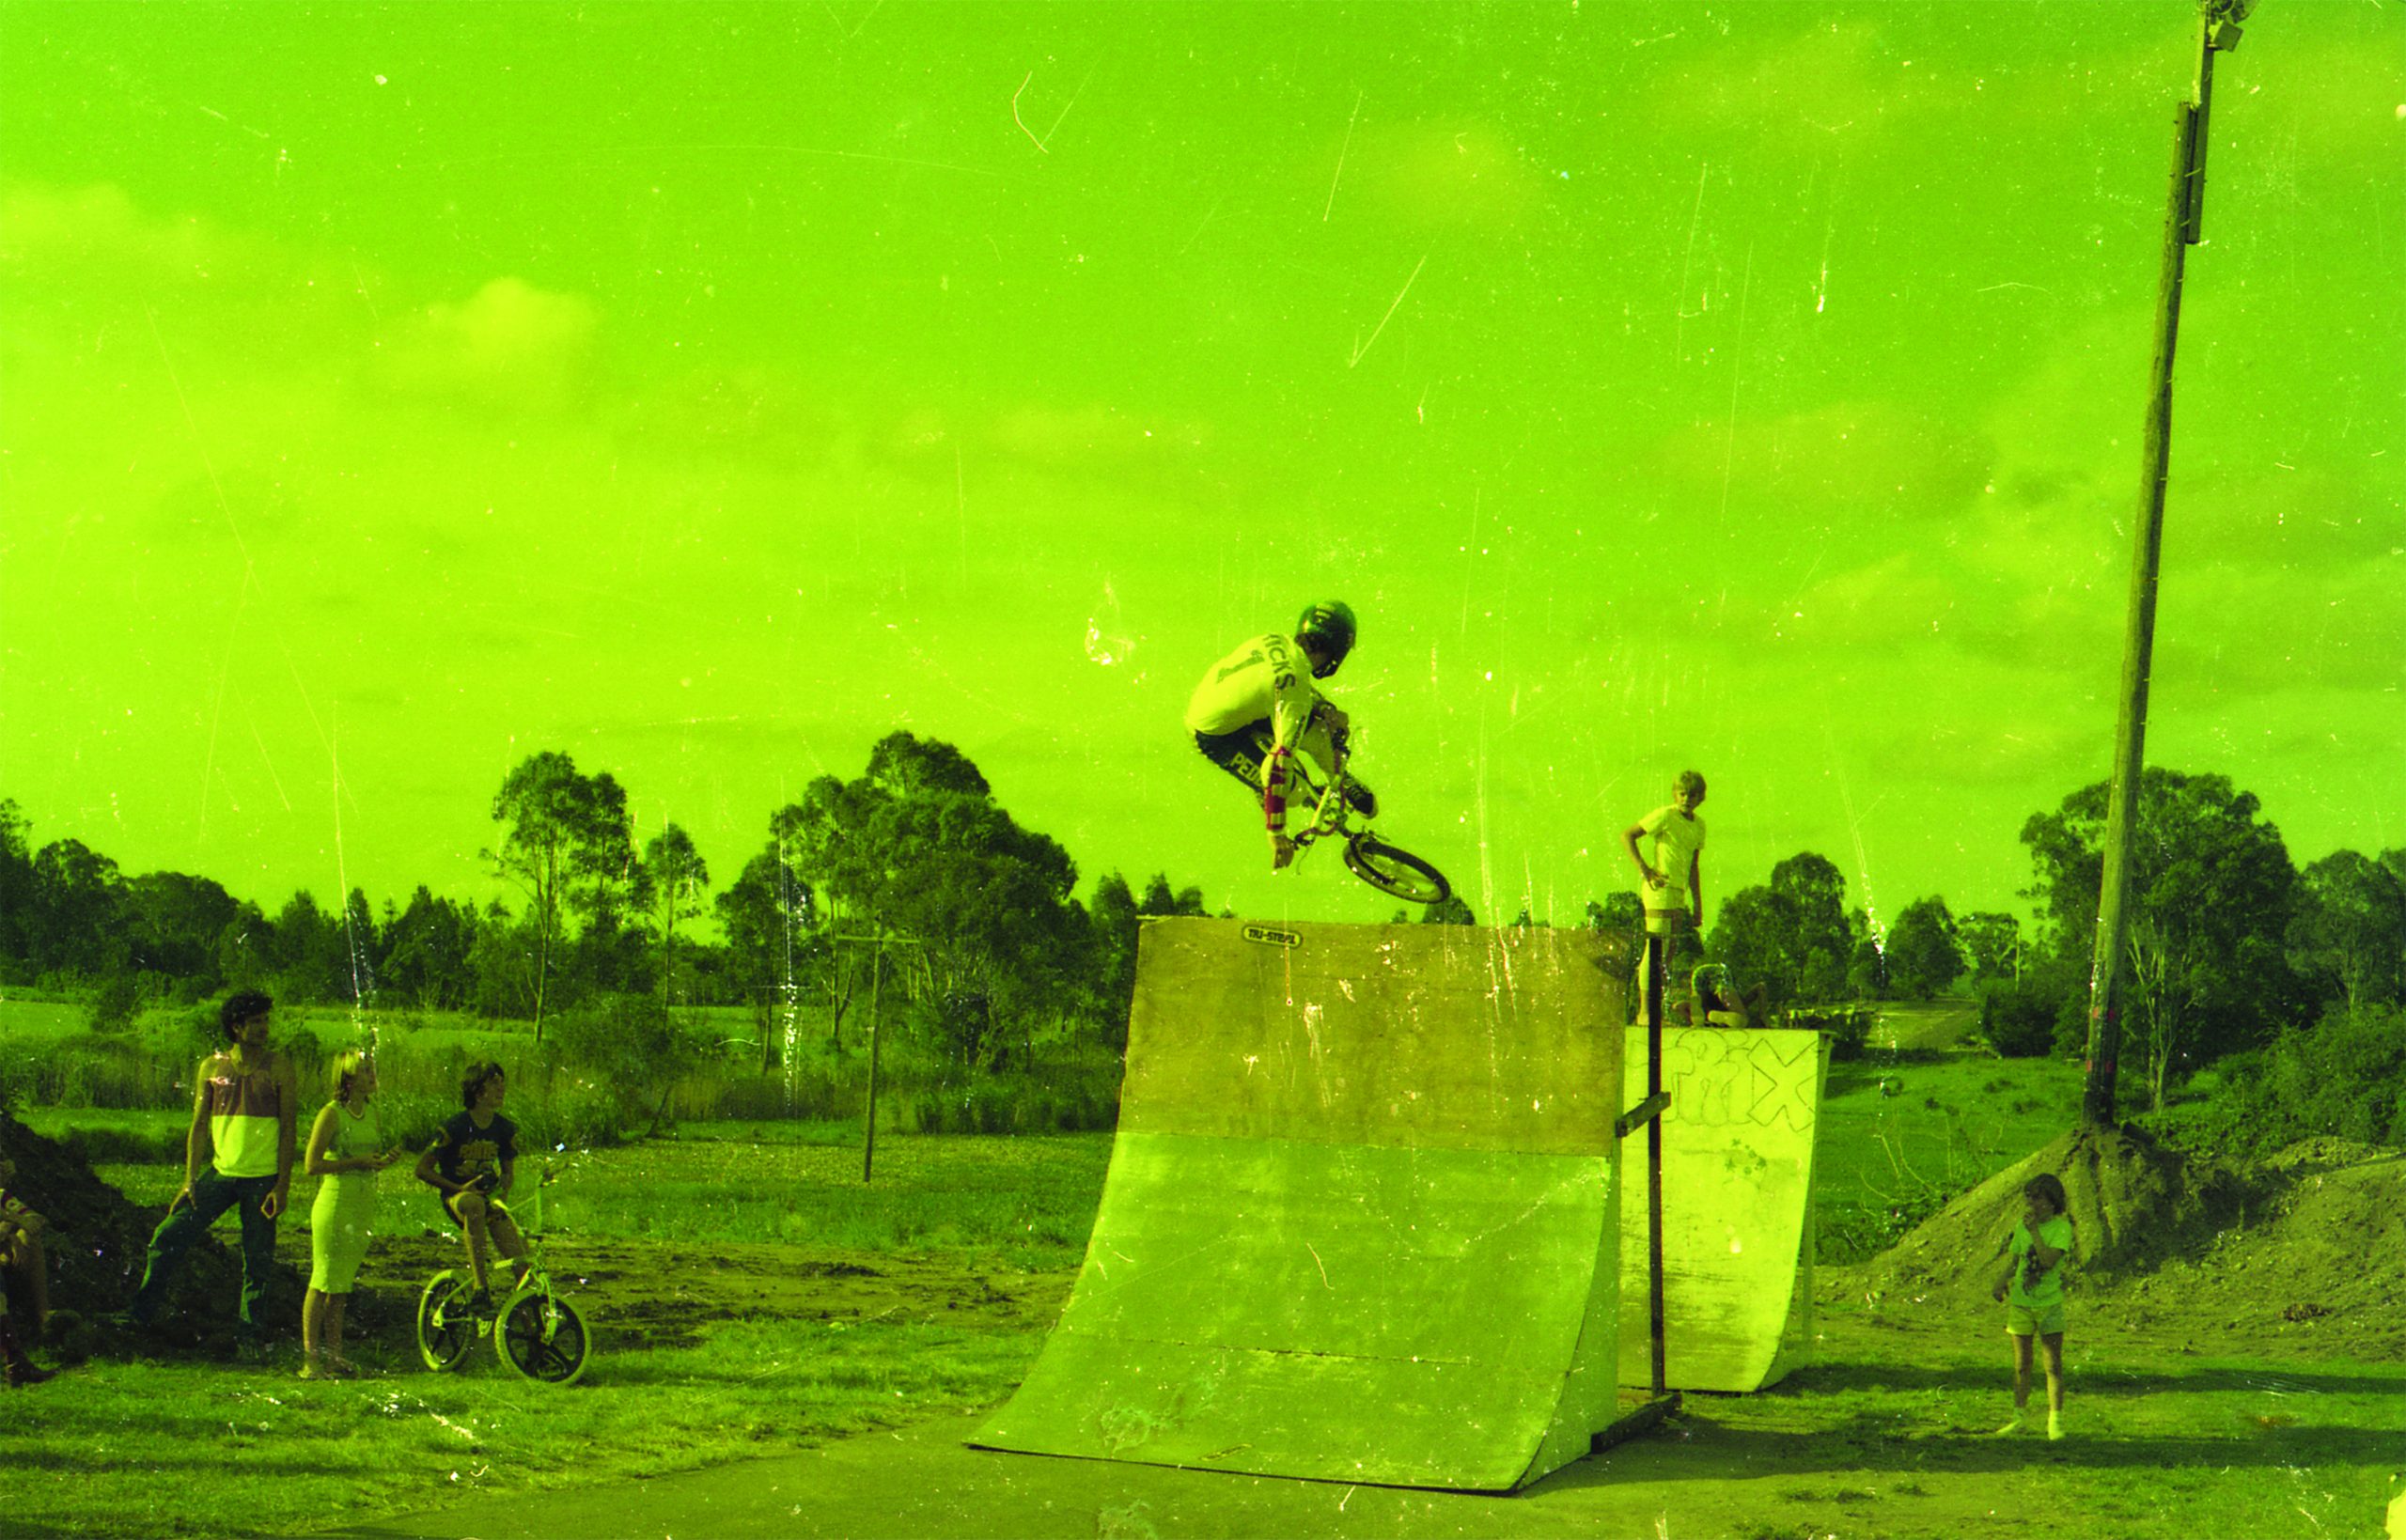 An image from Ross Lavender's book Transition: 40 years of Beenleigh BMX Park